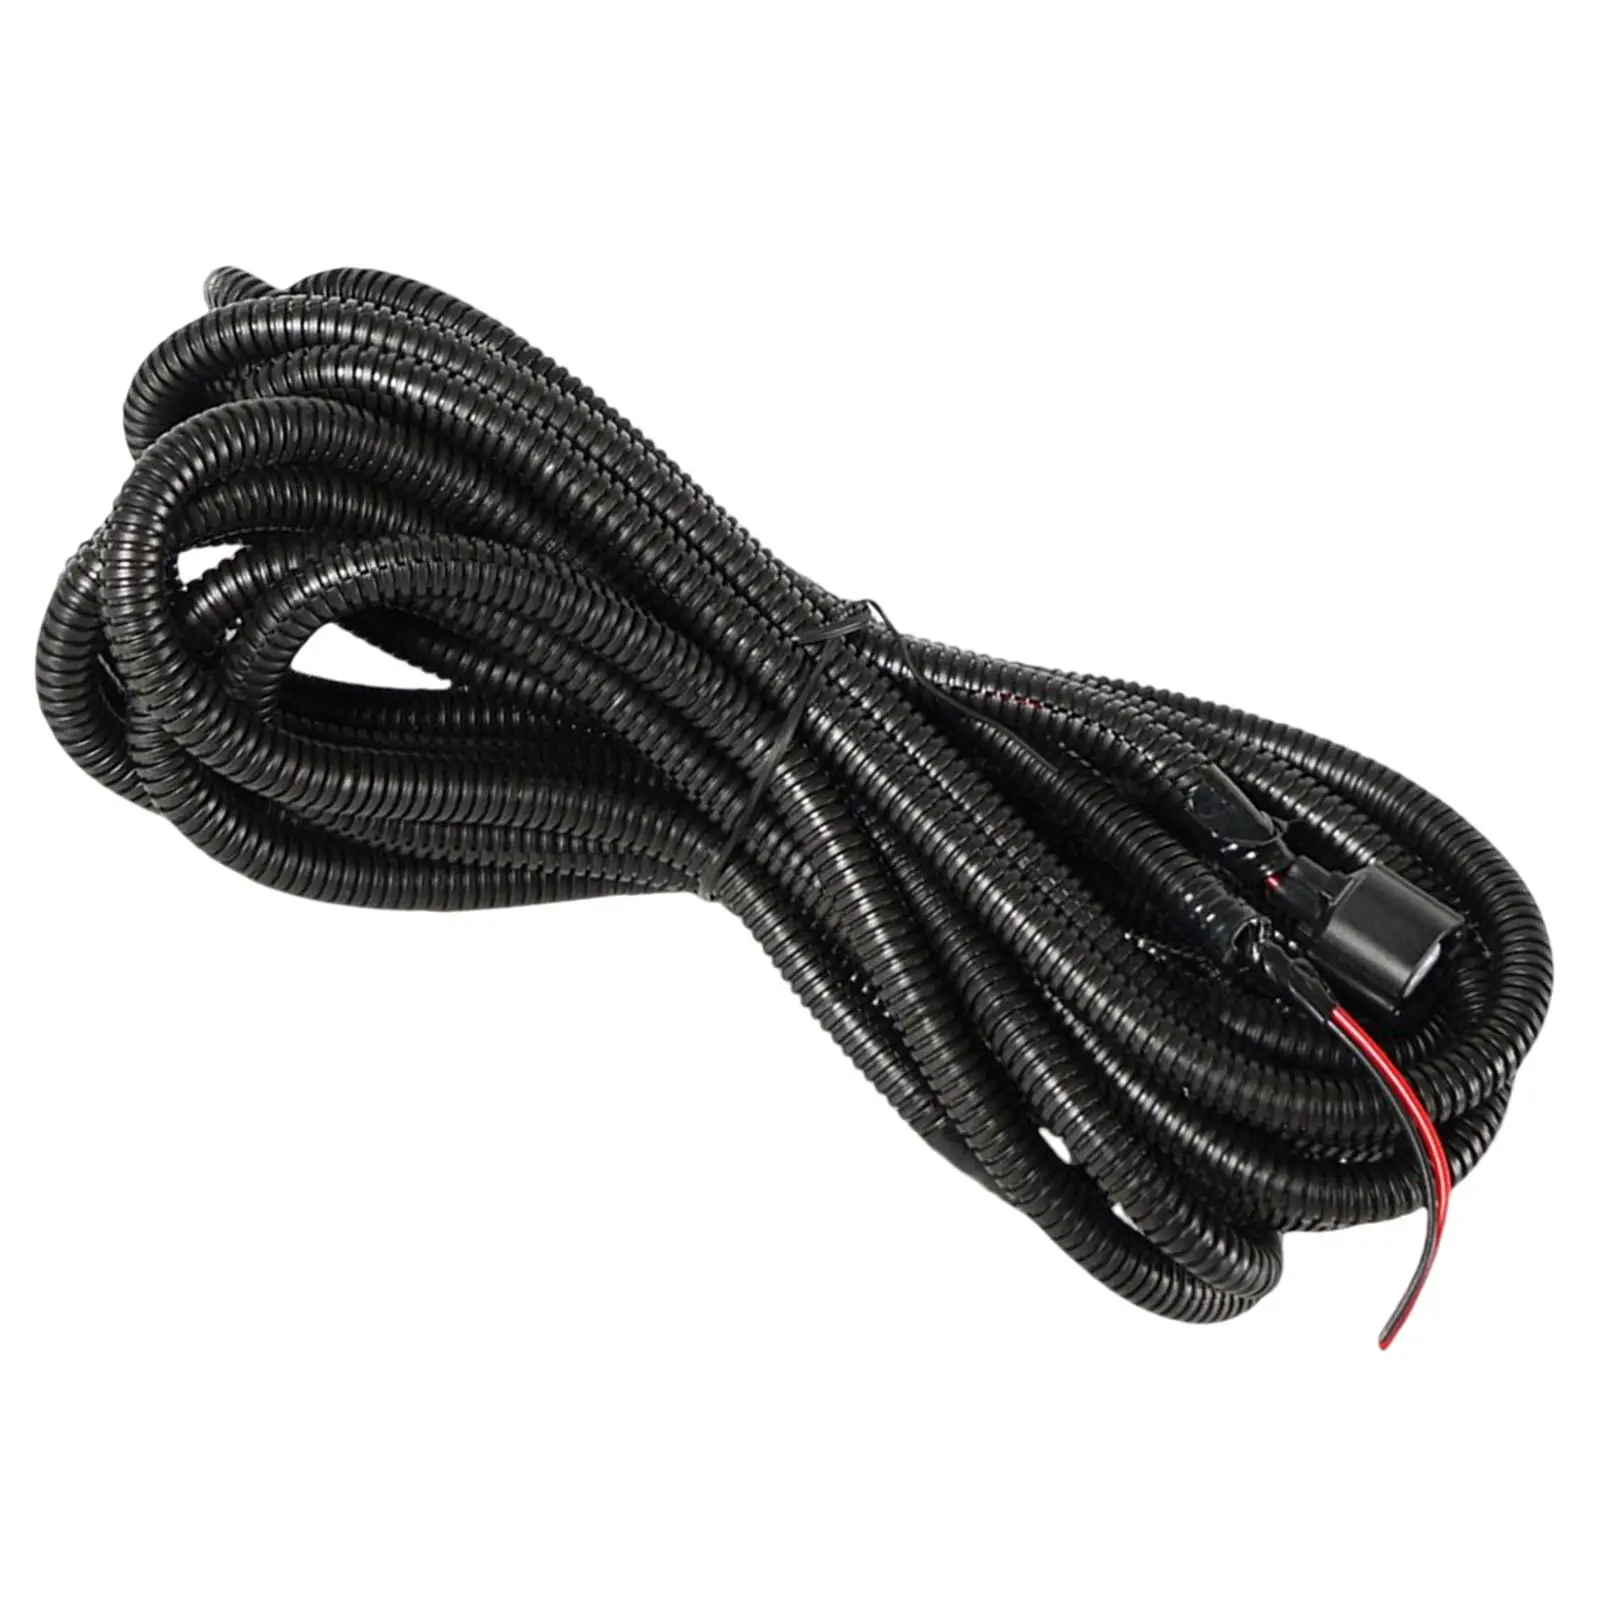 Electric Locker Wire Harness Axle P5155359 12V Insulating Surface for Jeep Wrangler TJ Lj JK Jku 44 20ft Long Connect Harness